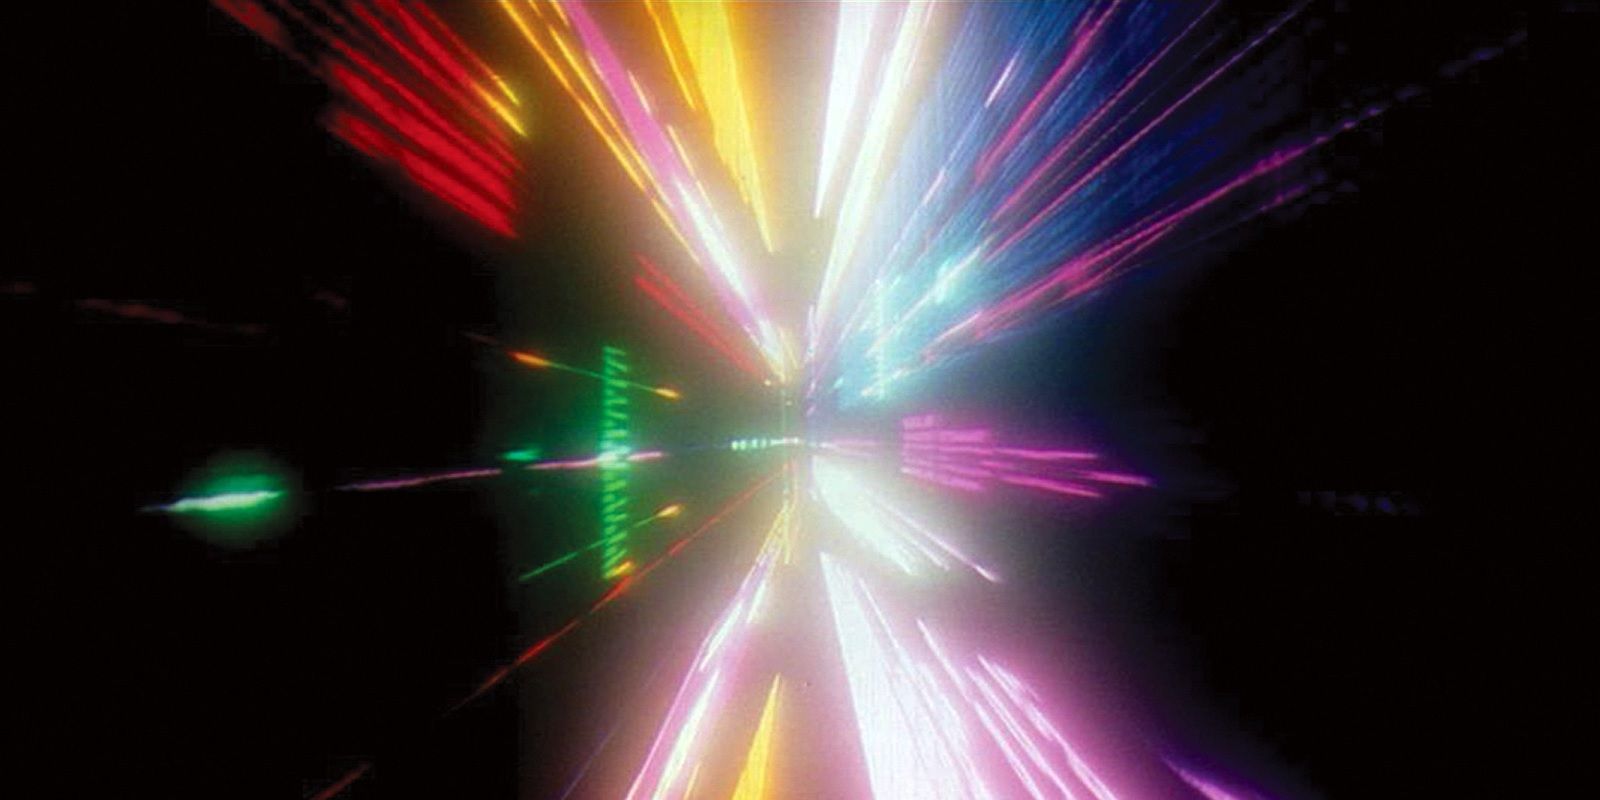 The multi-coloured star gate in A Space Odyssey